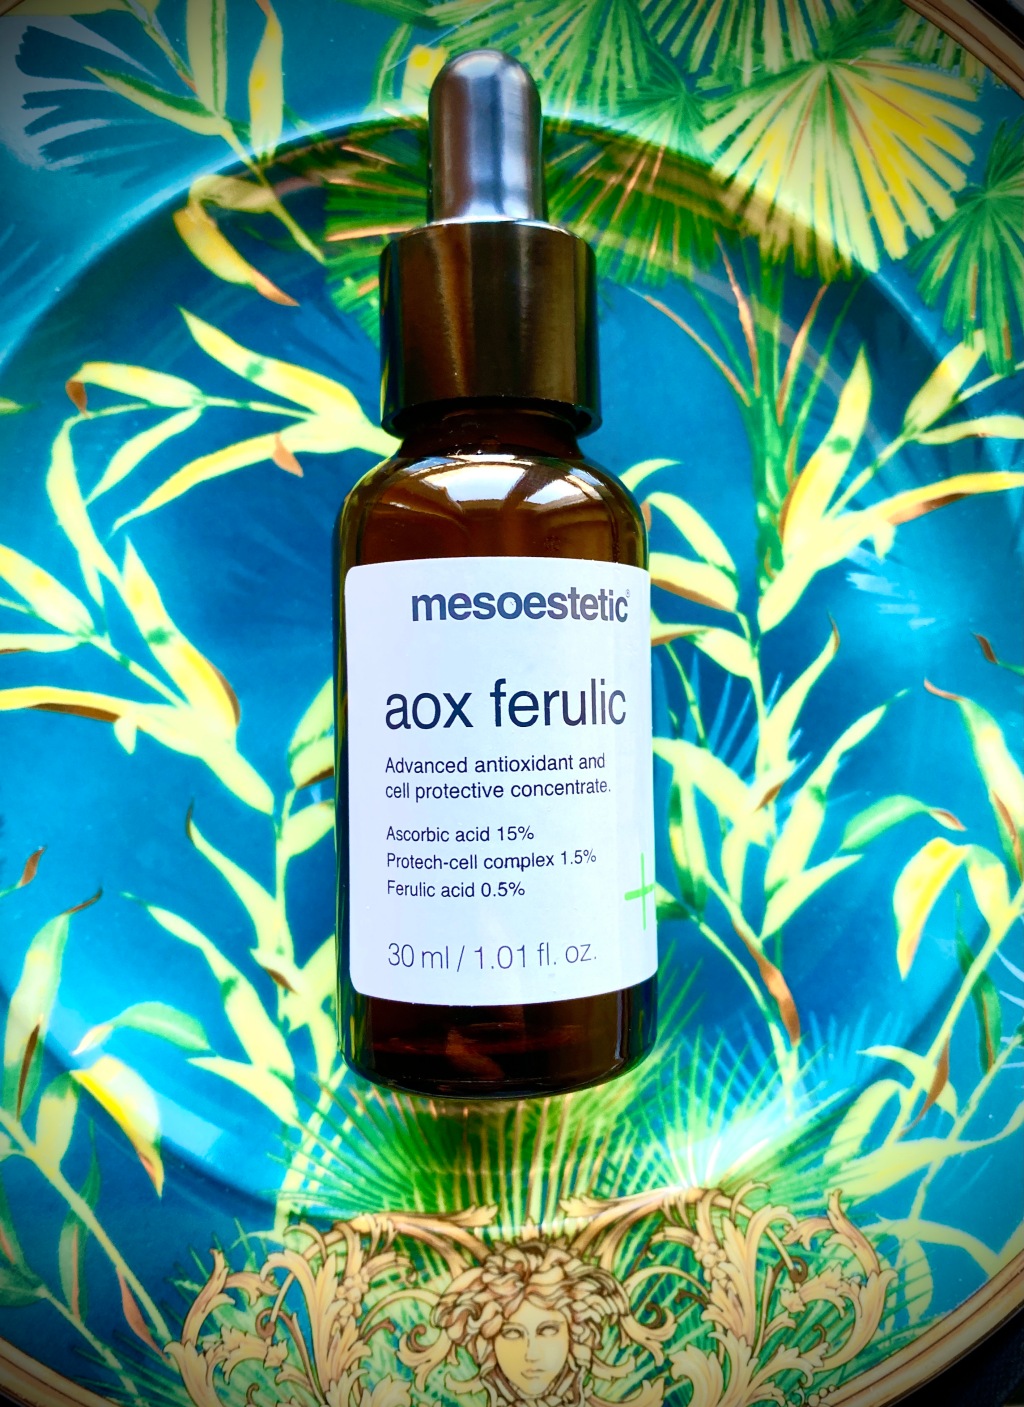 Mesoestetic AOX Ferulic – Review